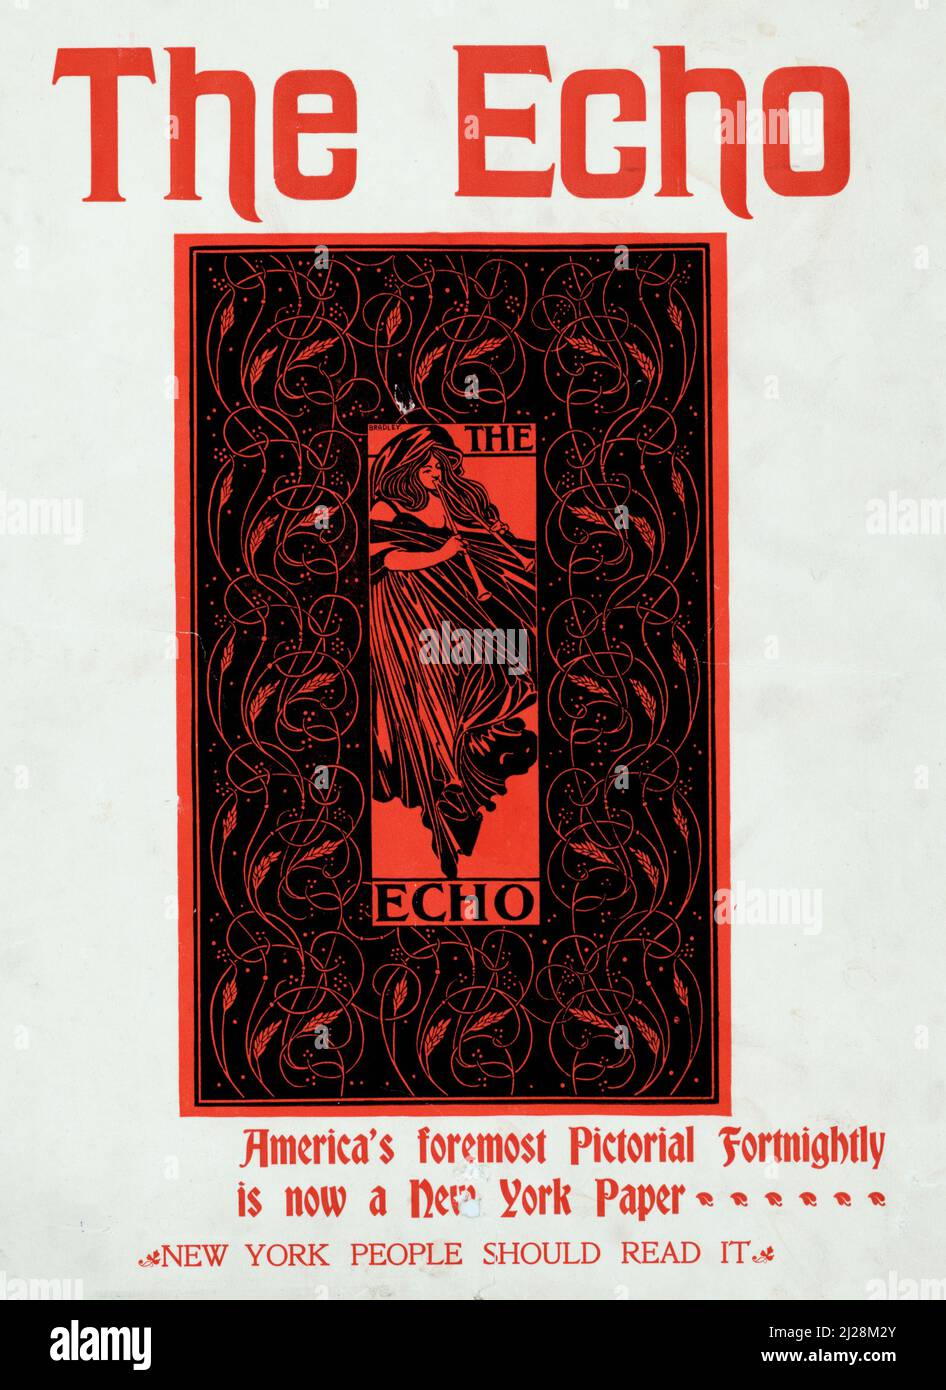 Will Bradley Artwork - The Echo (1890) American Art Nouveau - Old and vintage Poster / Magazine Cover. Stockfoto